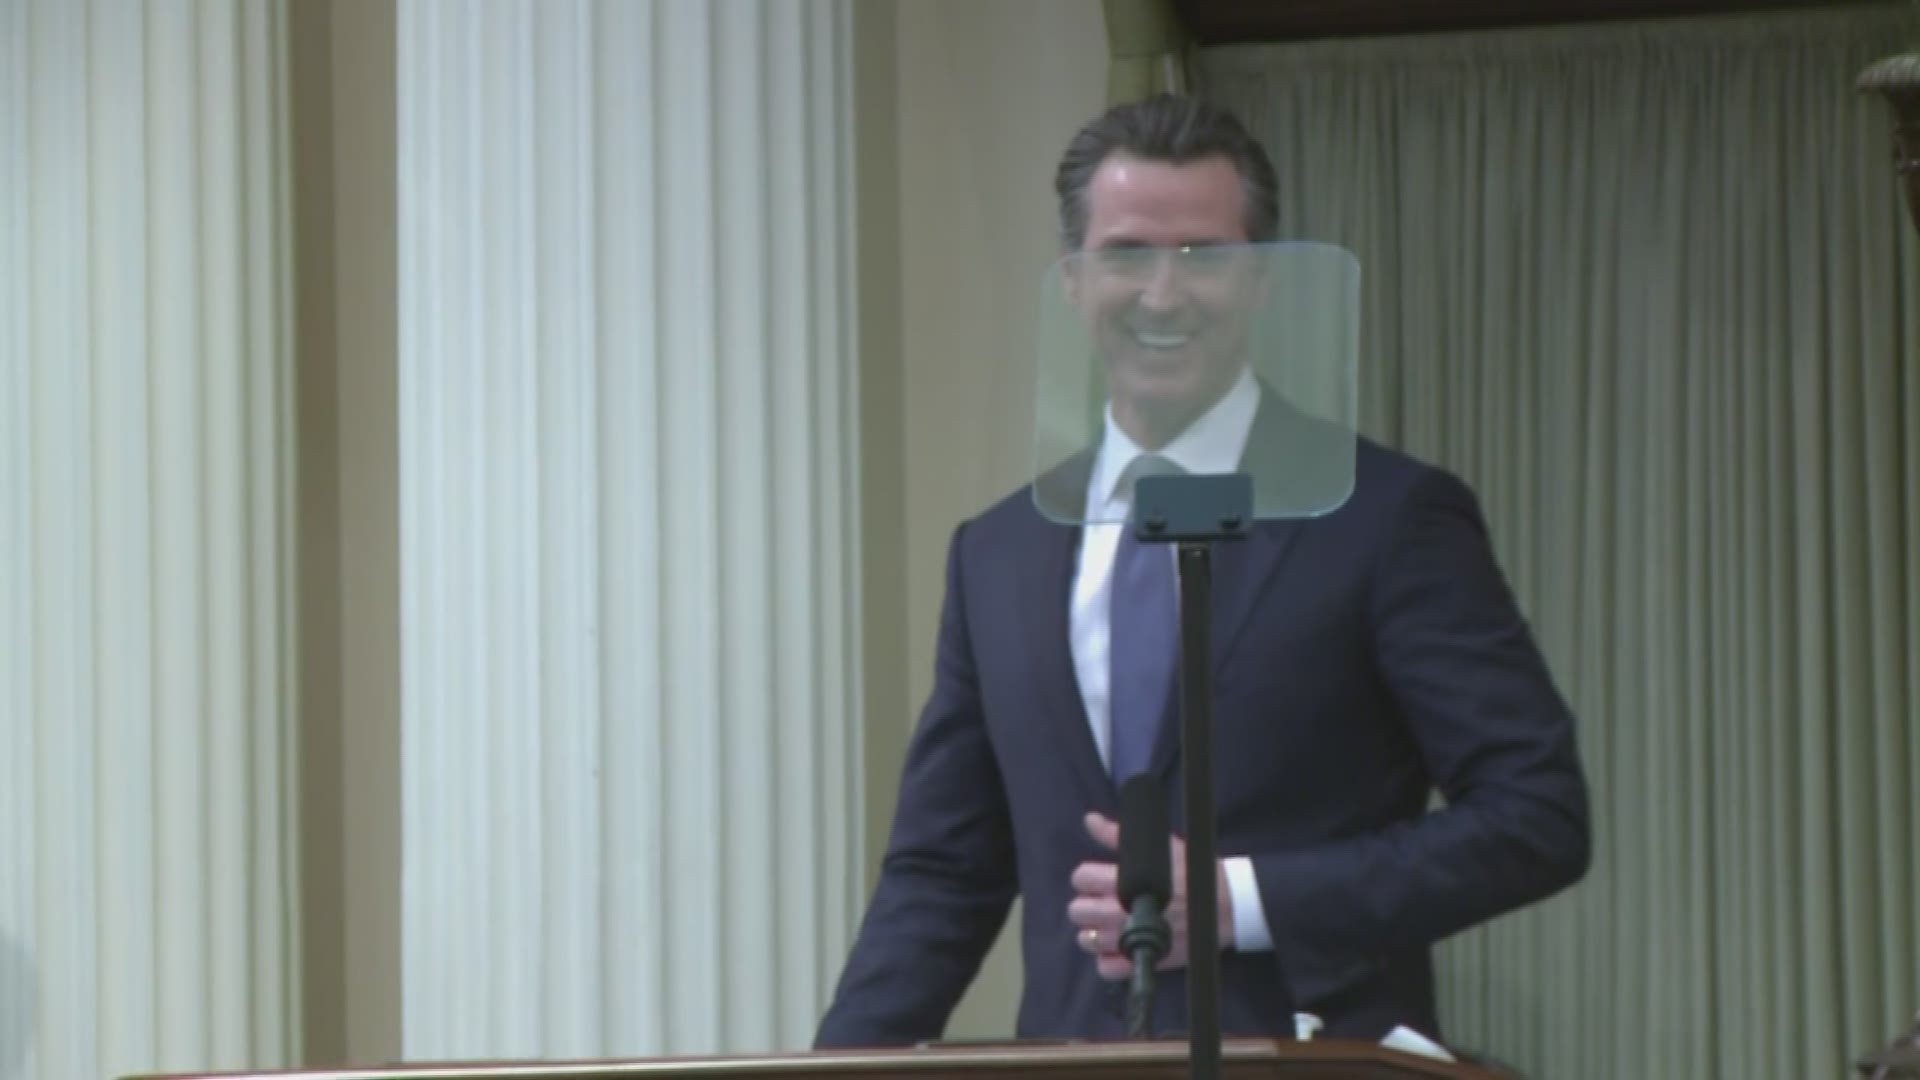 During his first State of the State address, California Governor Gavin Newsom touched on several topics, including high-speed rail service and PG&E.